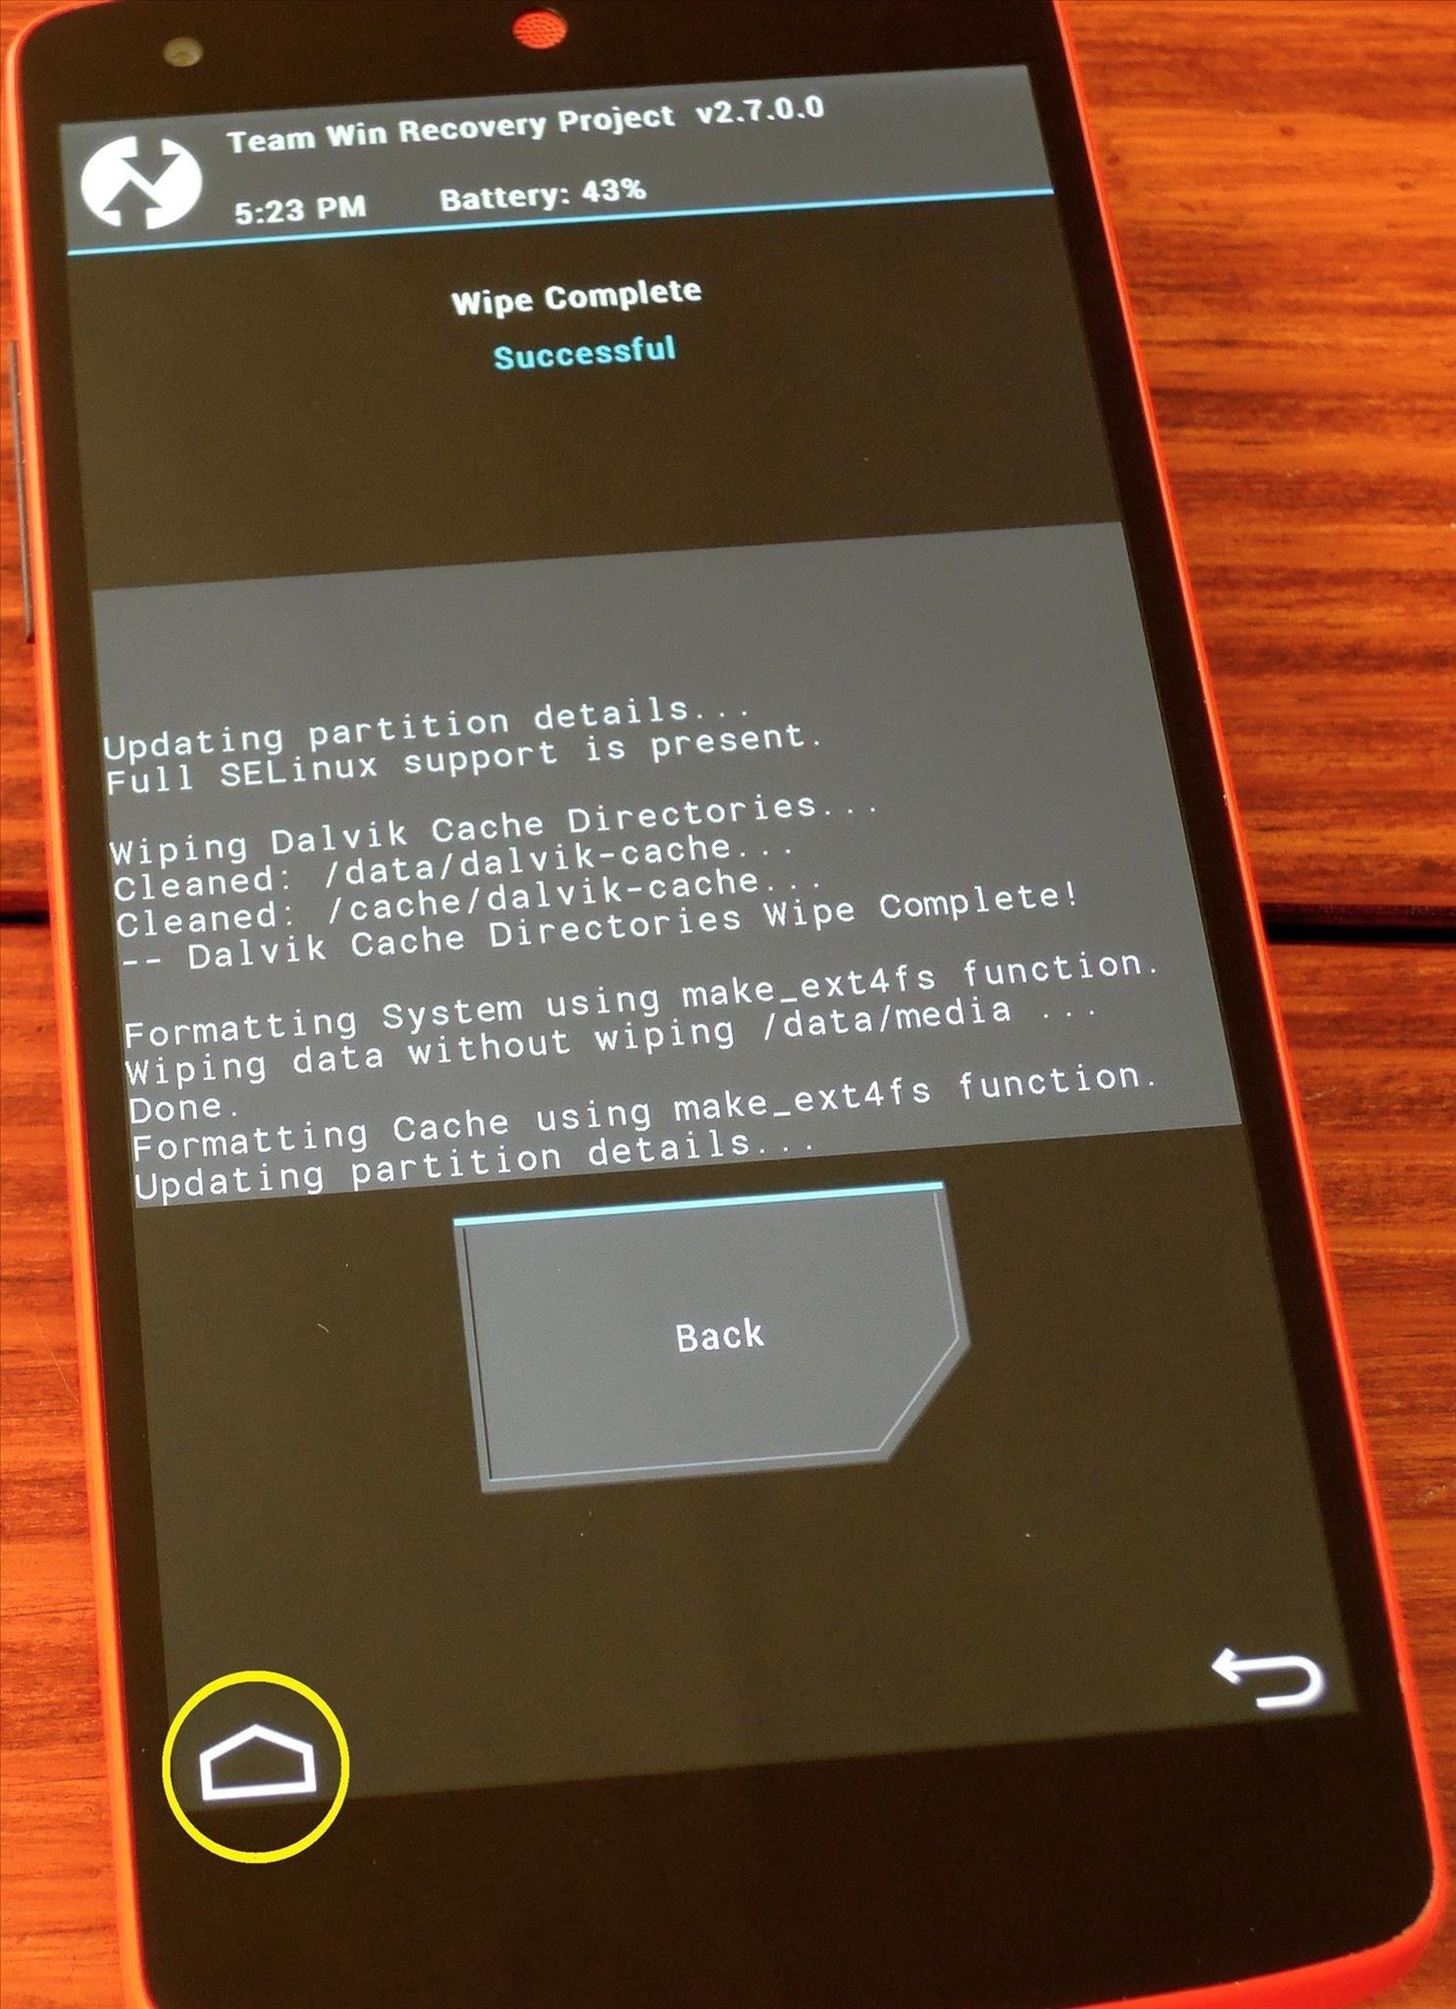 How to Get Custom Hotword Detection to Launch Any App on Your Nexus 5